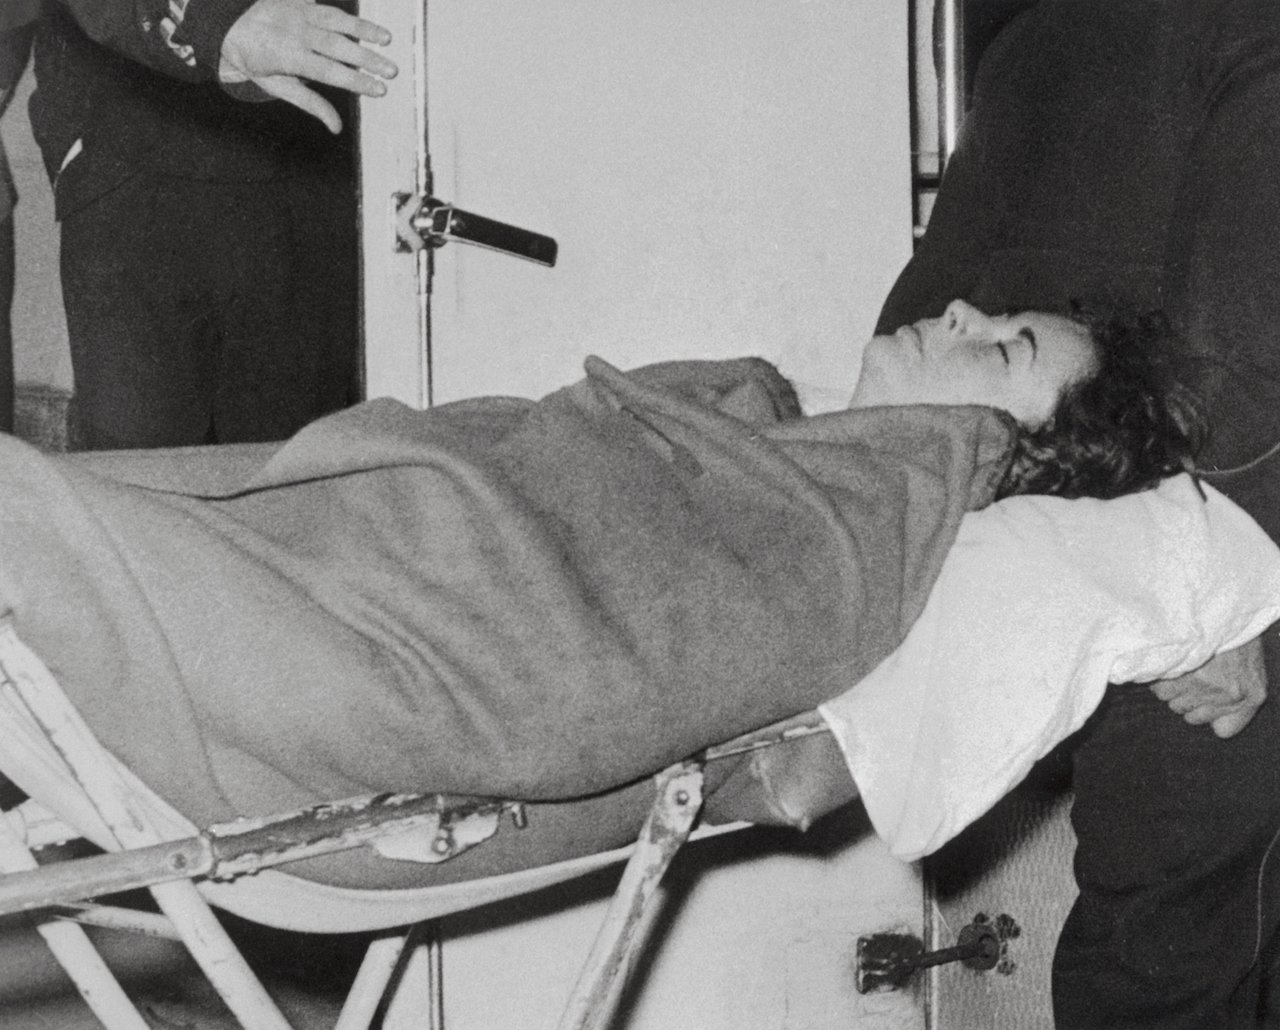 Elizabeth Taylor is carried by stretcher into a London hospital where she received treatment for pneumonia in 1961